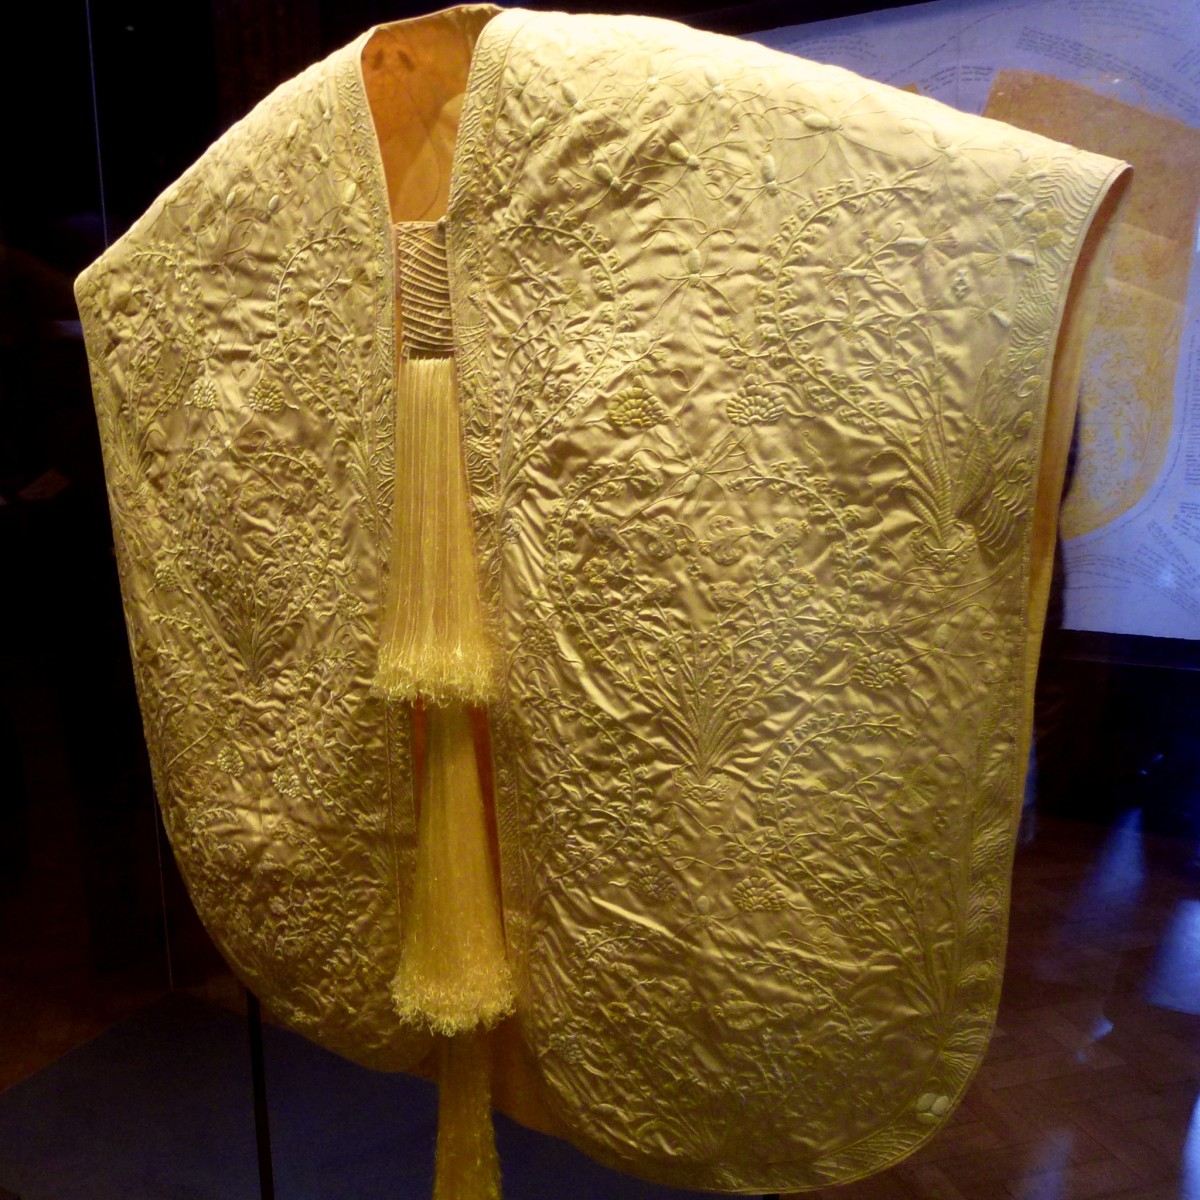 A cape made from golden orb spider silk exhibited at the Victoria and Albert Museum in London. Created by textile designer, Simon Peers, and entrepreneur, Nicholas Godley, who previously produced a shawl for the American Museum of Natural History.